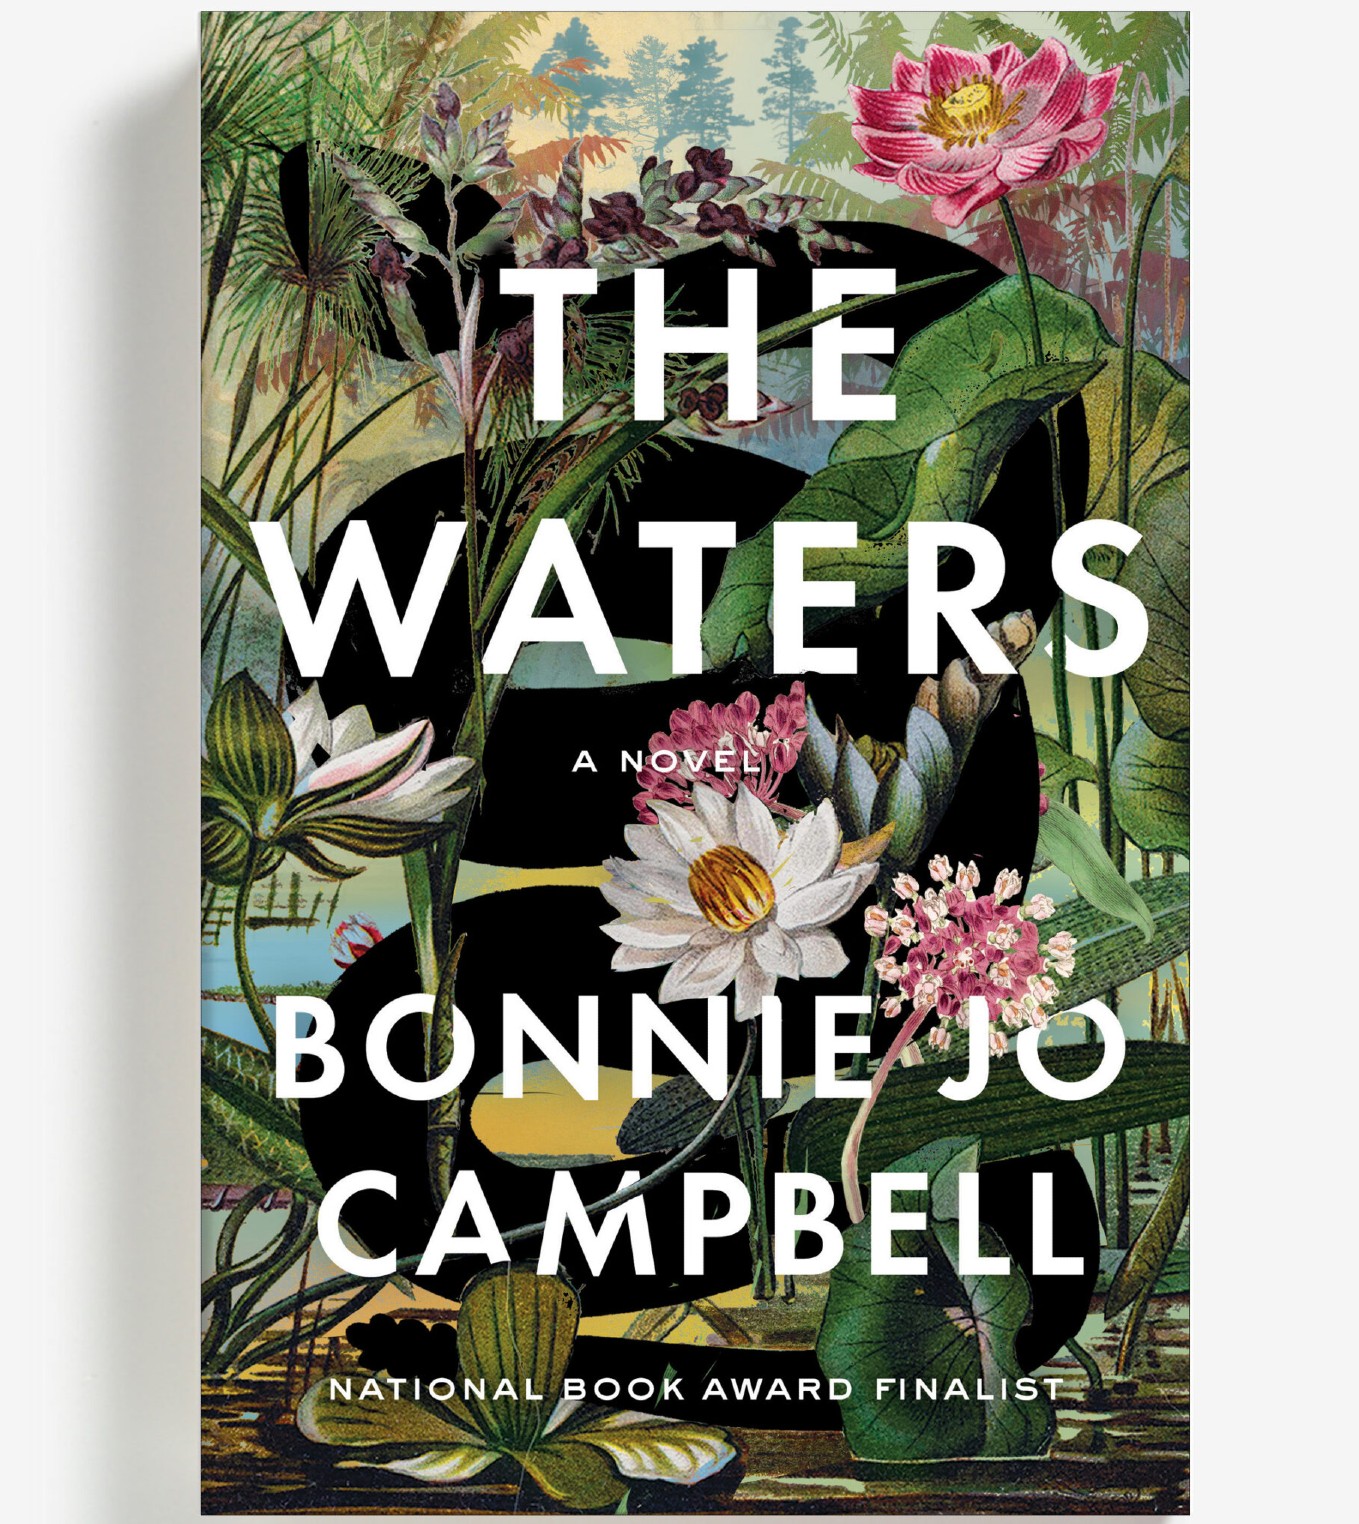 Book cover with images of water flowers and the wording: "The Waters, a Novel, Bonnie Jo Campbell, National Book Award Finalist"